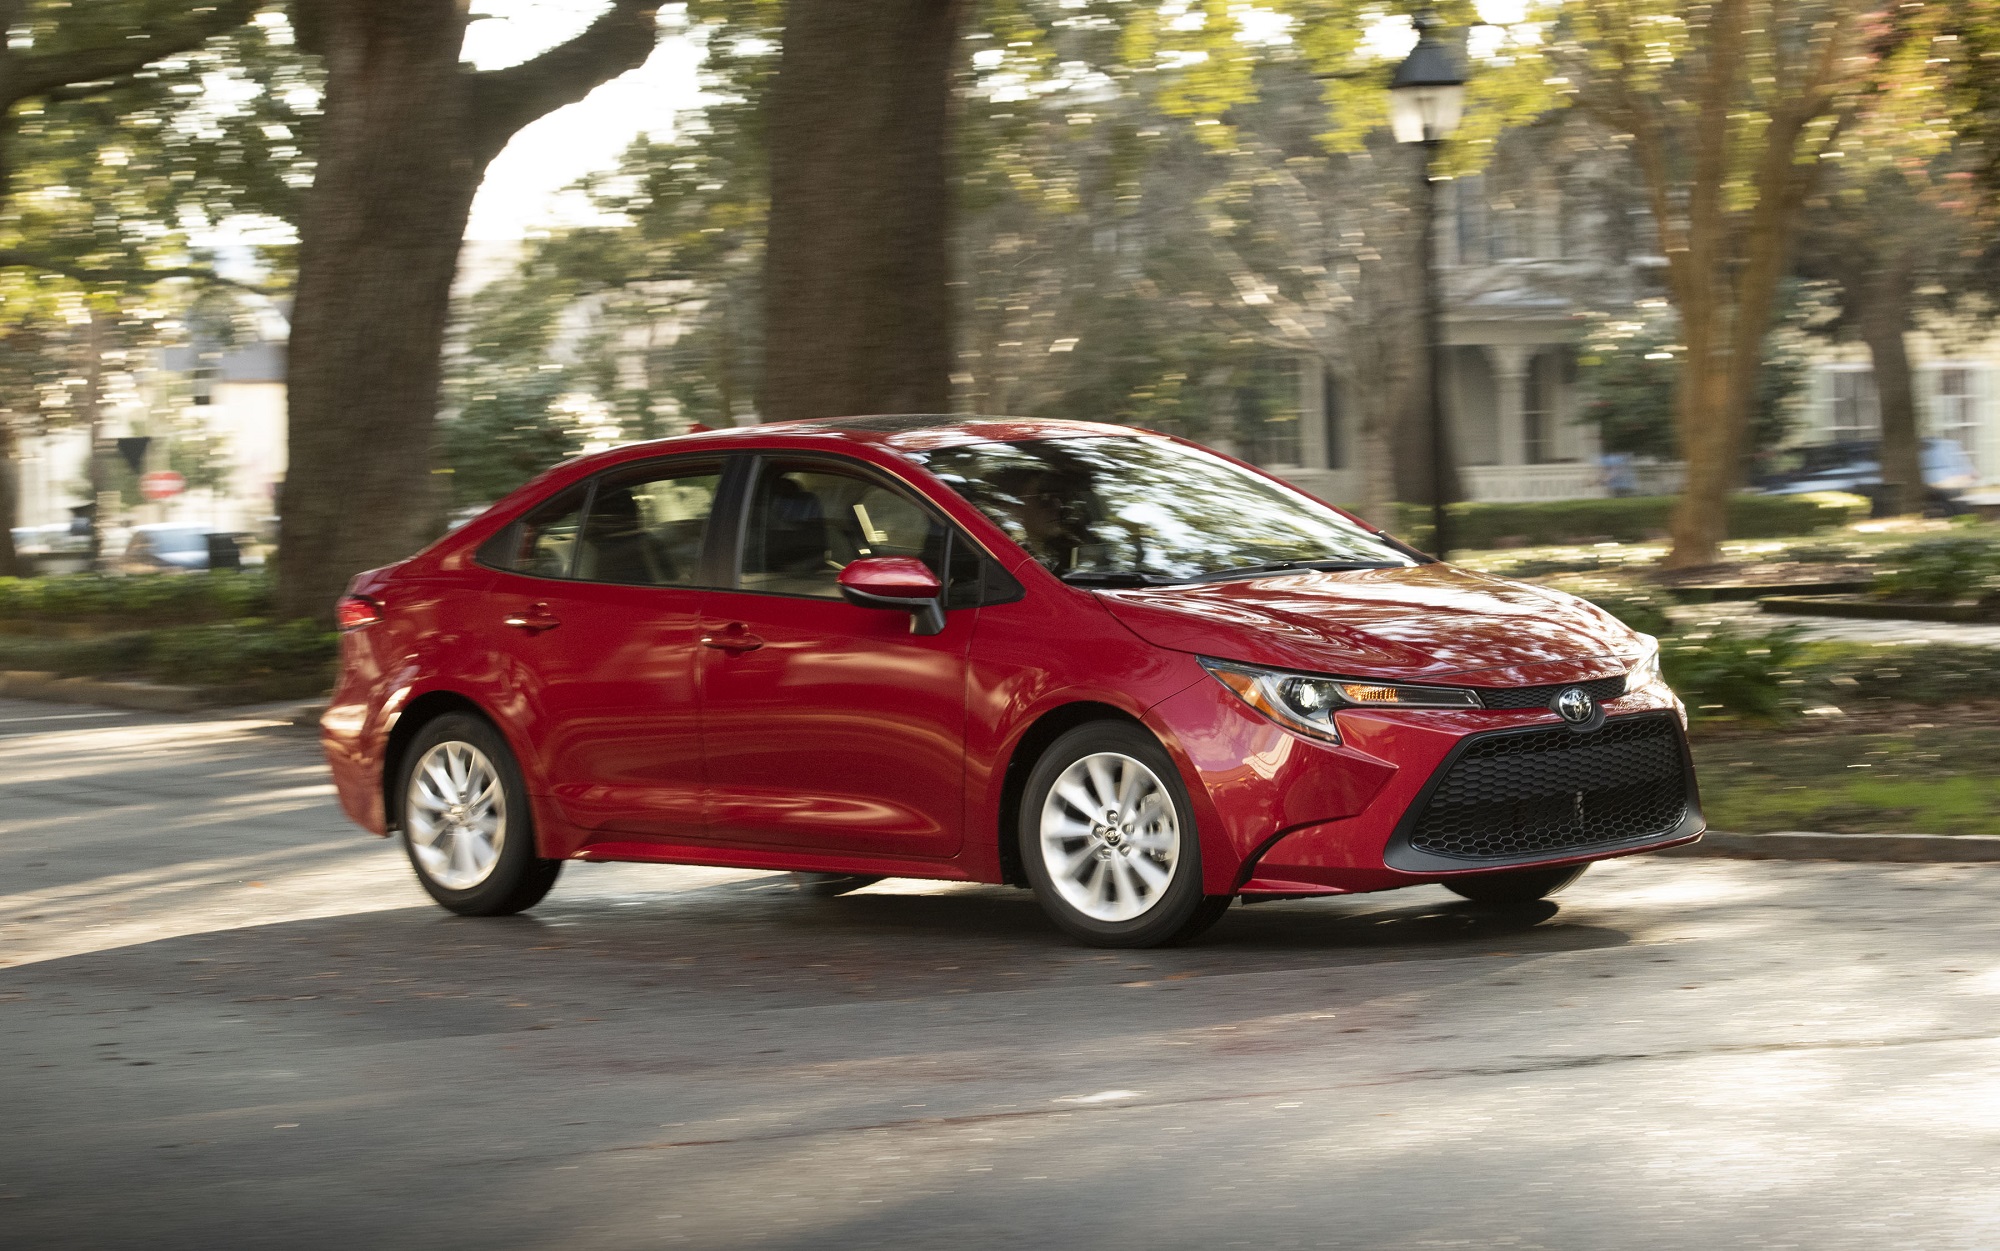 A Toyota Corolla, like this one cornering in a city, is one of the most popular used cars in states like California.